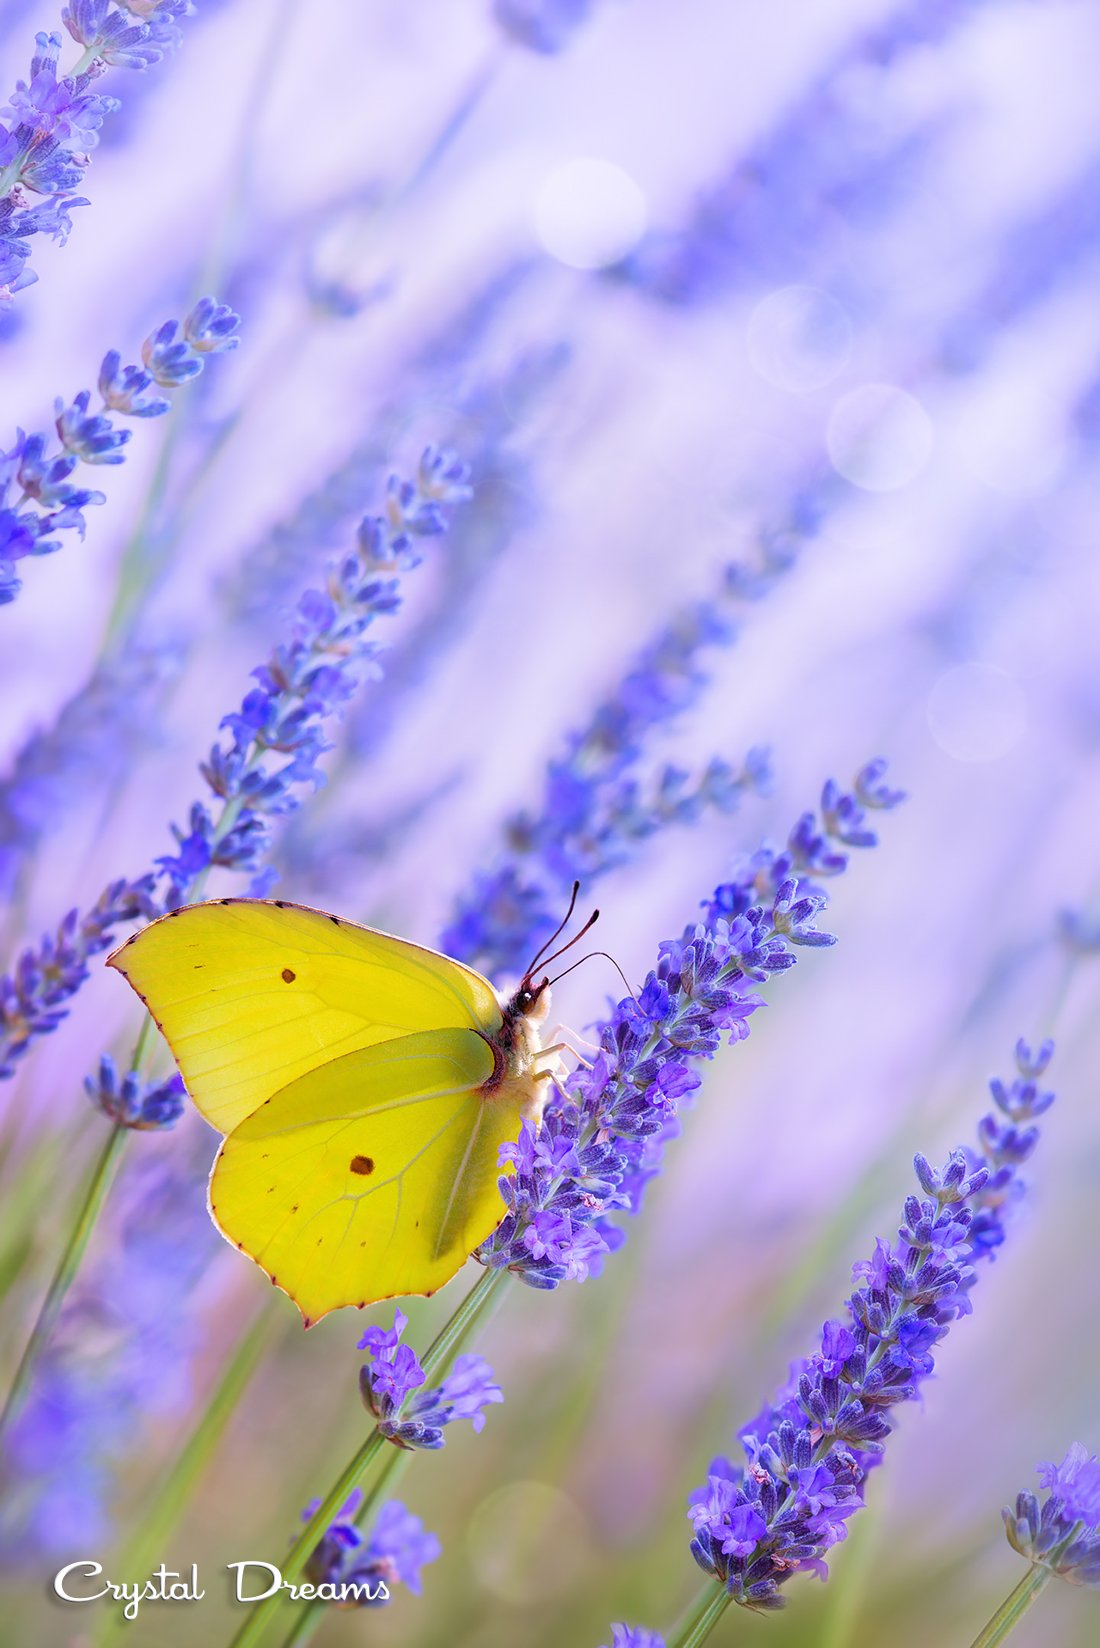 Butterfly, Color, Crystal Dreams, Lavender, Macro, Morning, Nature, Provence, Татьяна Крылова